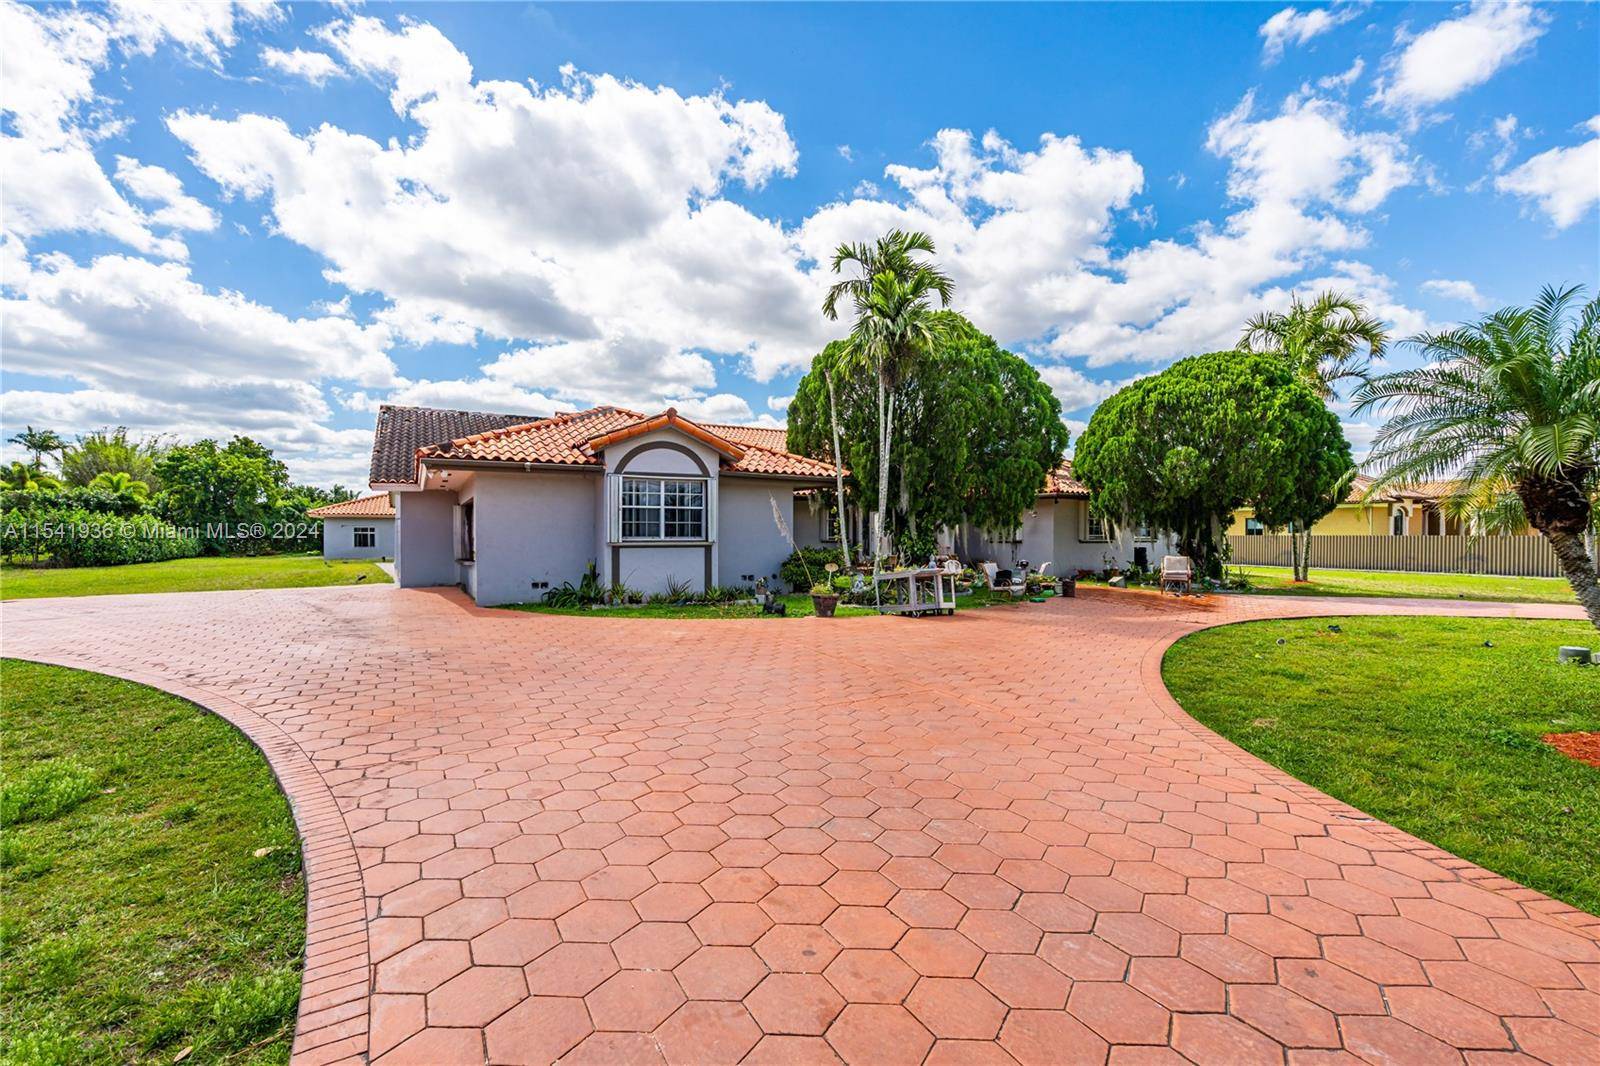 Welcome Home ! Nestled in the heart of Homestead is this spacious 5 bedroom 4 bathroom home on 1.